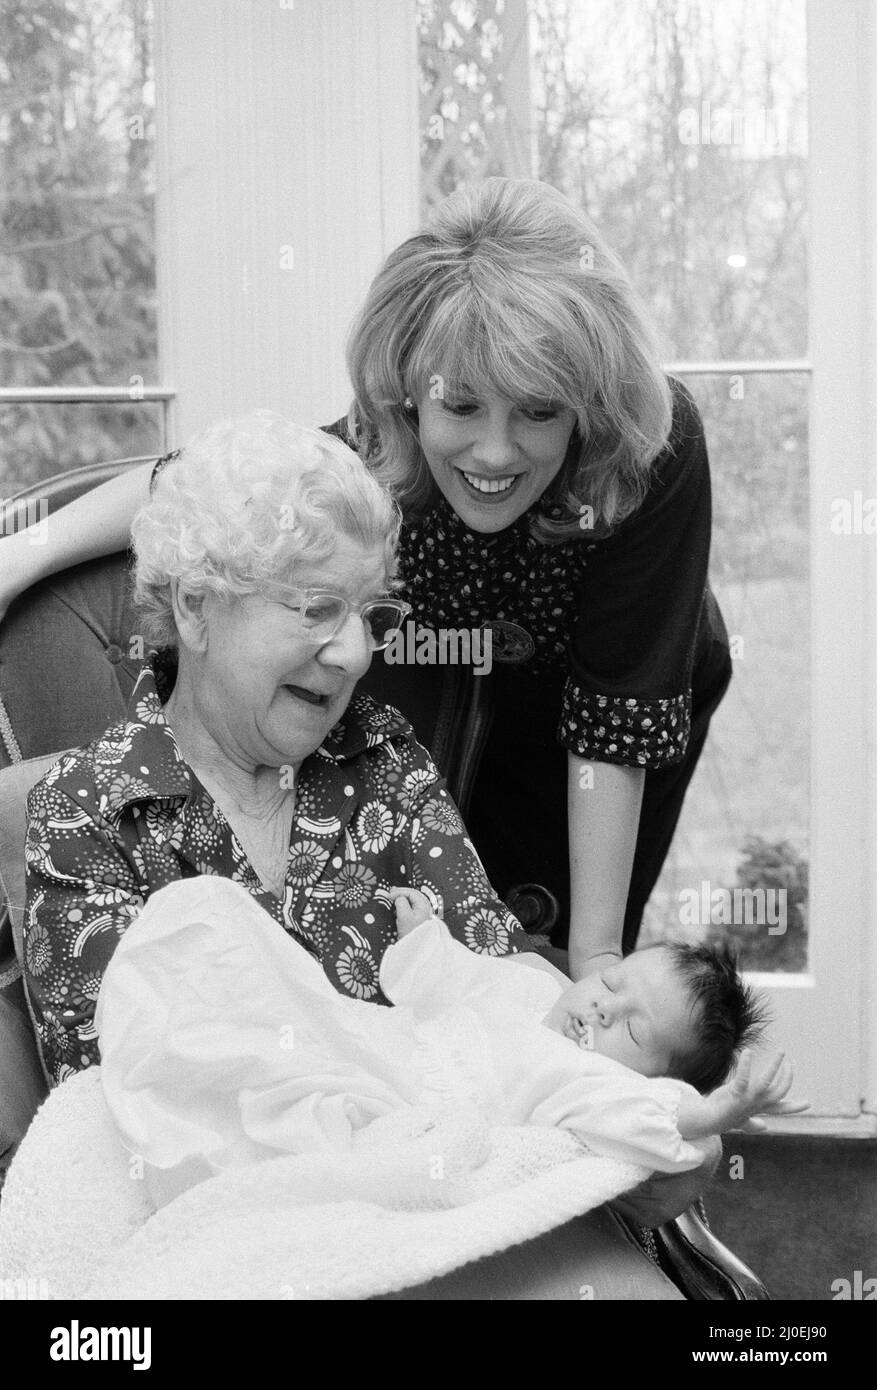 'That's Life' presenter Esther Rantzen presents her month old baby Emily to Annie Mizen today. Annie, 86, who became famous on That's Life by eating caviar and Chinese food, testing drinks and dancing in the street, was invited to elevenses at Esther's home and to meet Emily. 22nd February 1978. Stock Photo